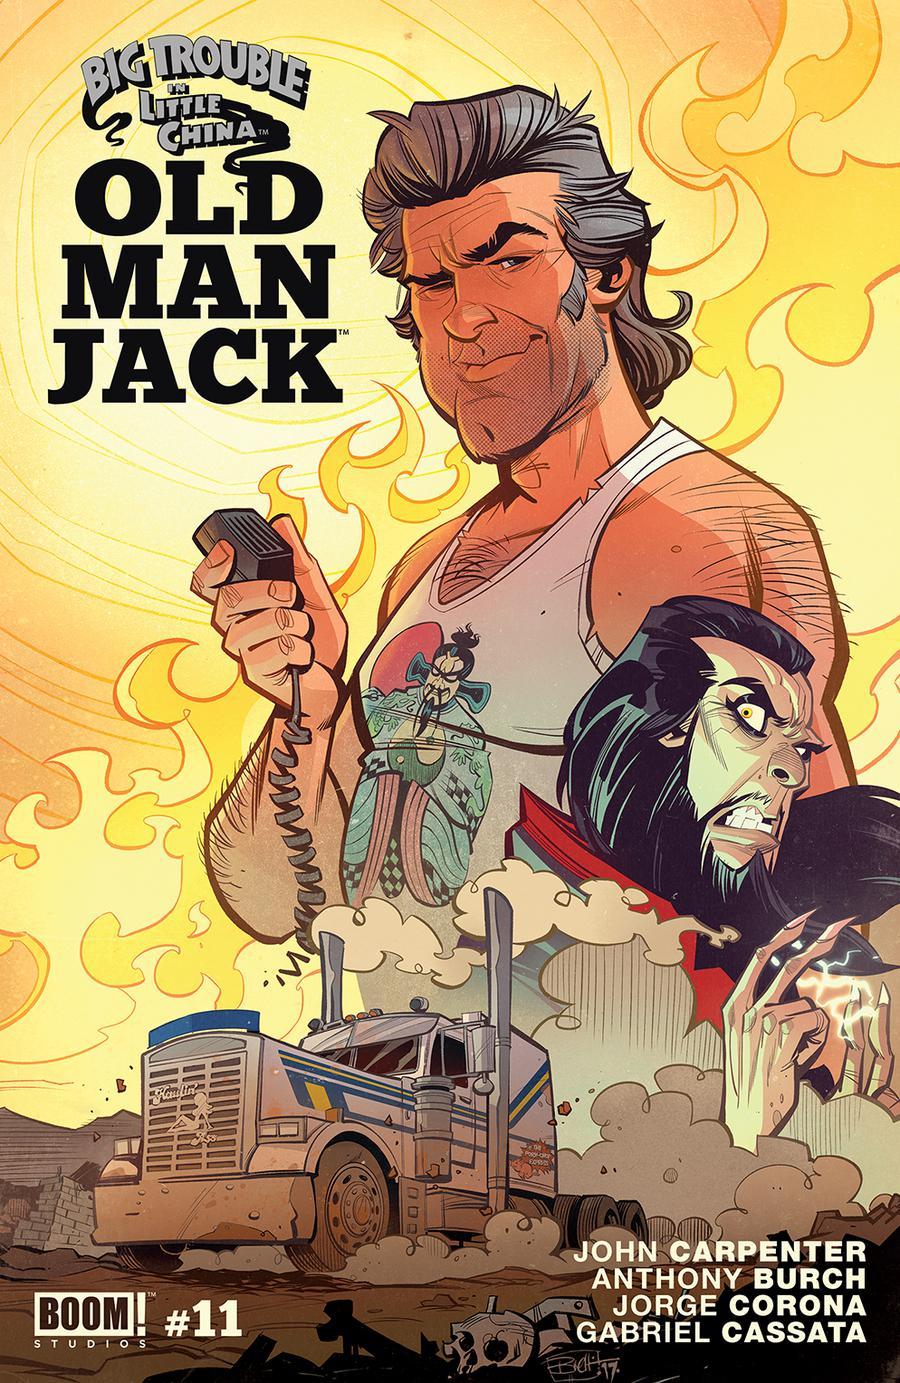 Big Trouble In Little China Old Man Jack Vol. 1 #11